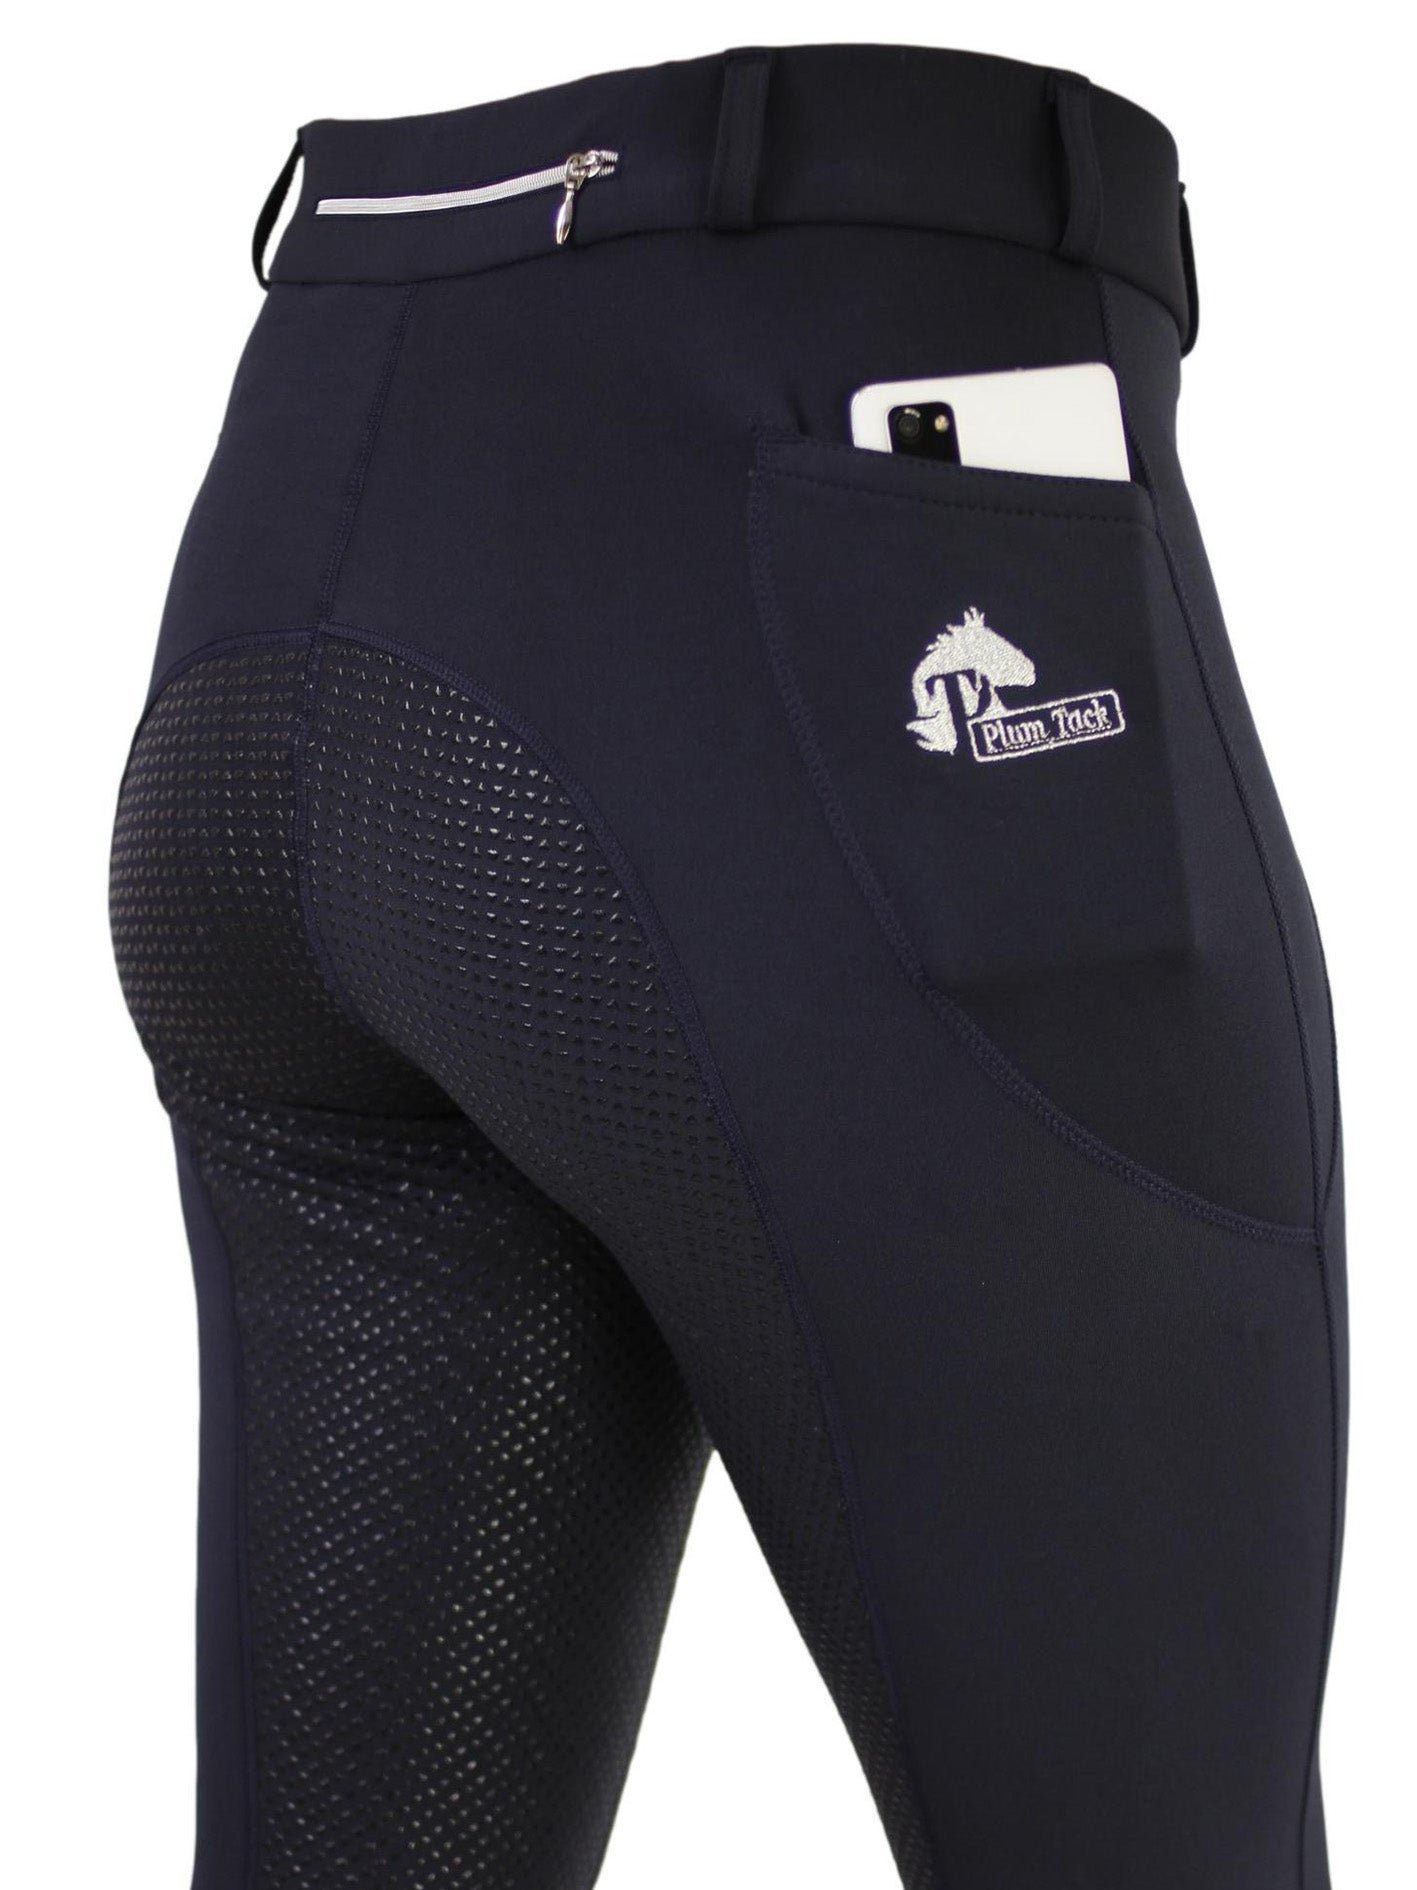 Winter riding tights in Navy. In sizes 6 to 28